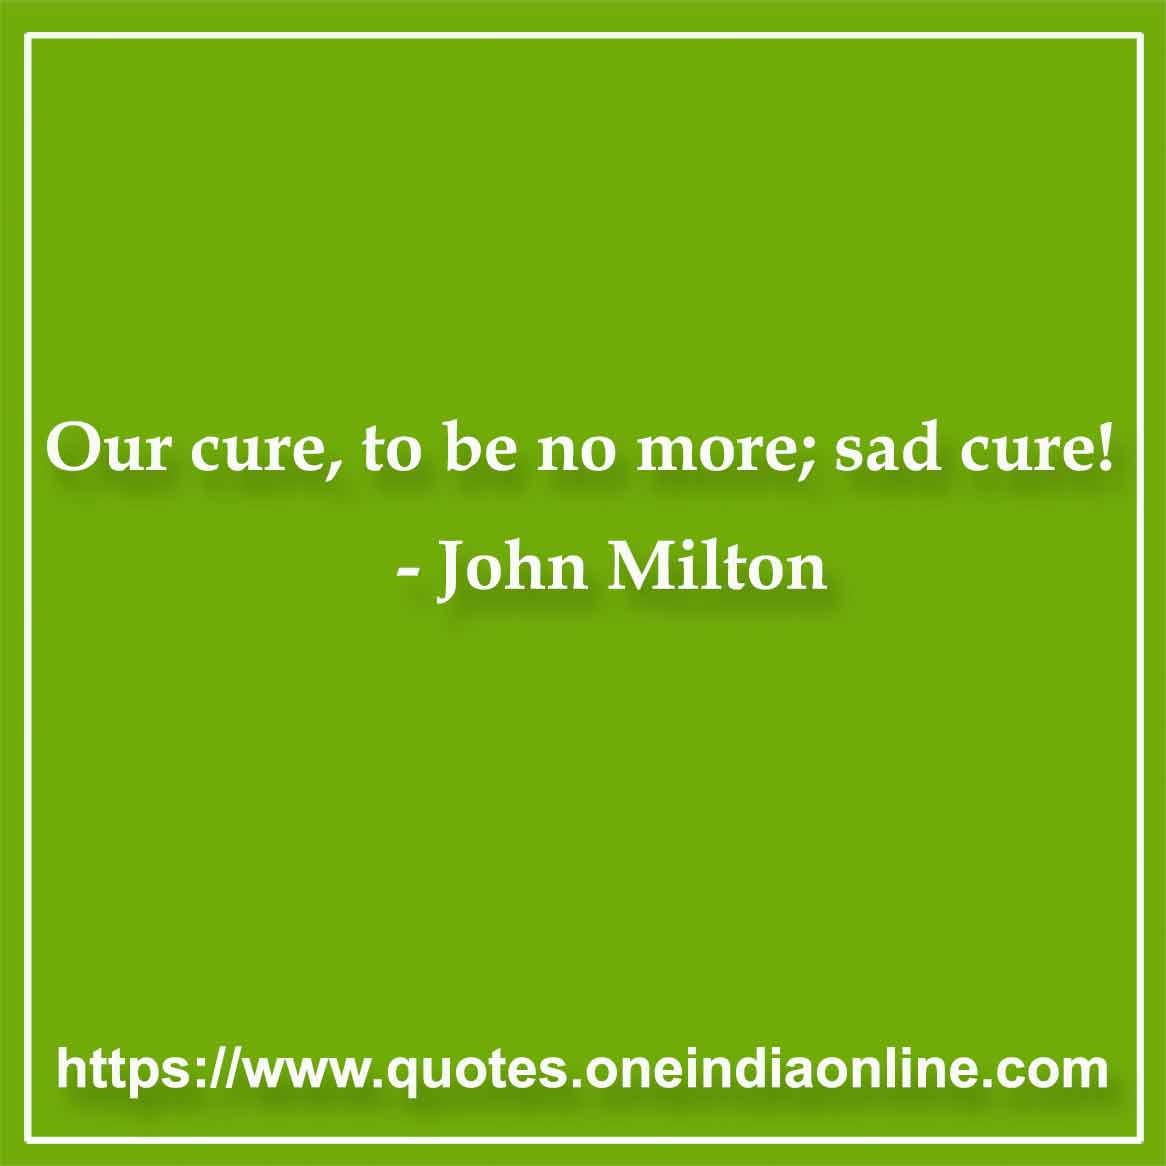 Our cure, to be no more; sad cure! 

- Thought of the Day by John Milton Sayings